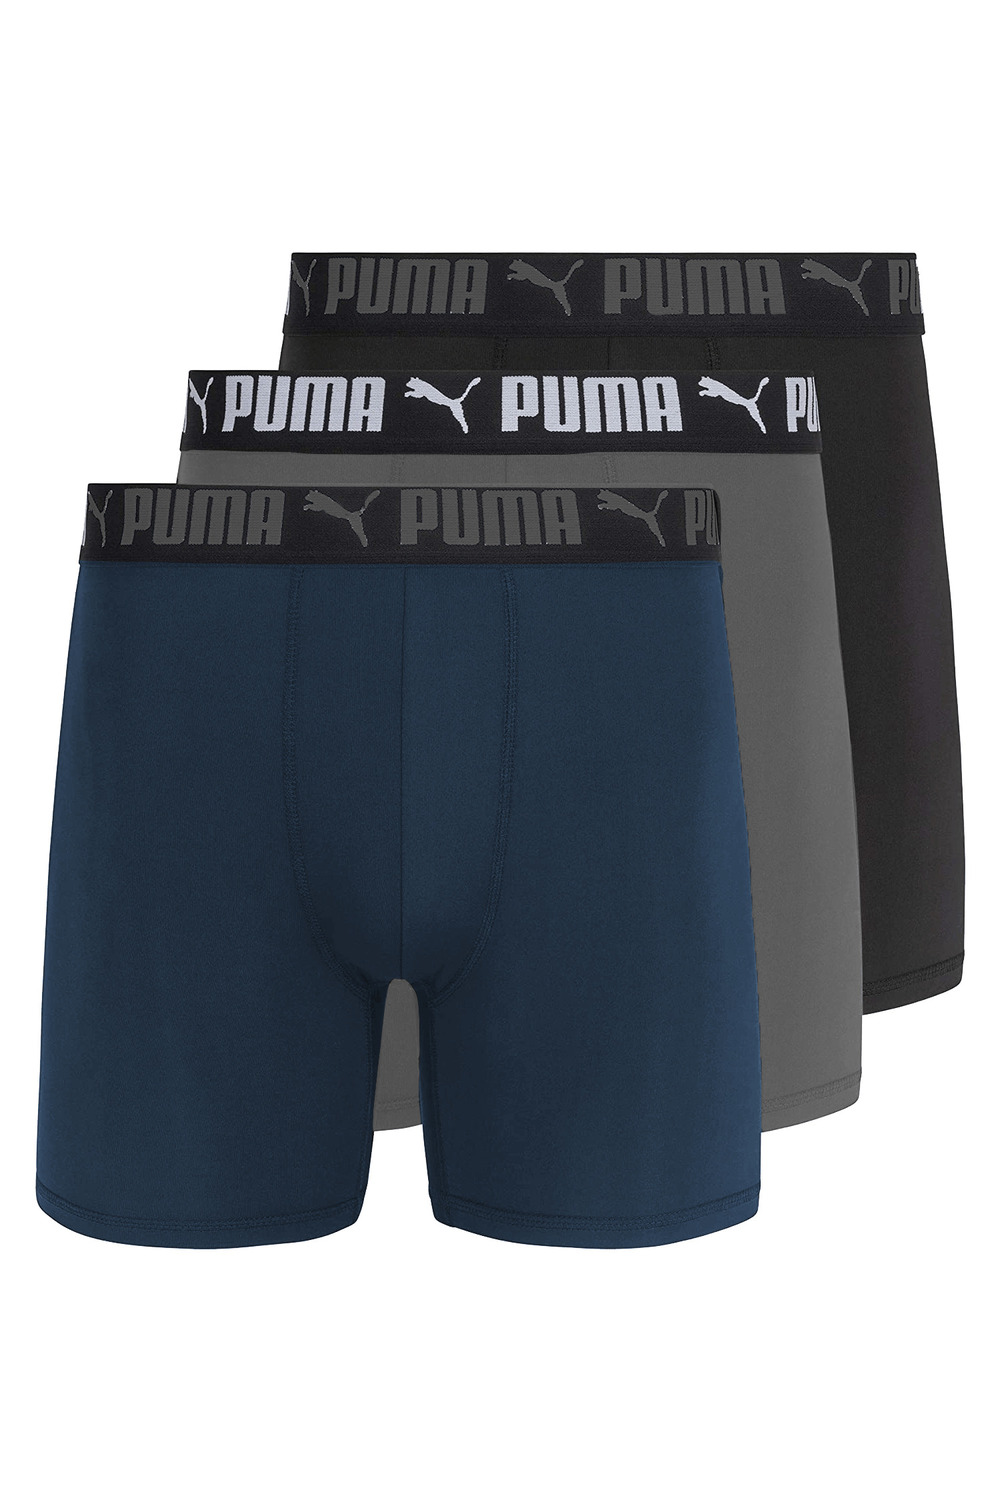 https://www.rossy.ca/media/A2W/products/puma-mens-athletic-fit-performance-boxer-briefs-pk-of-3-83168-3.jpg